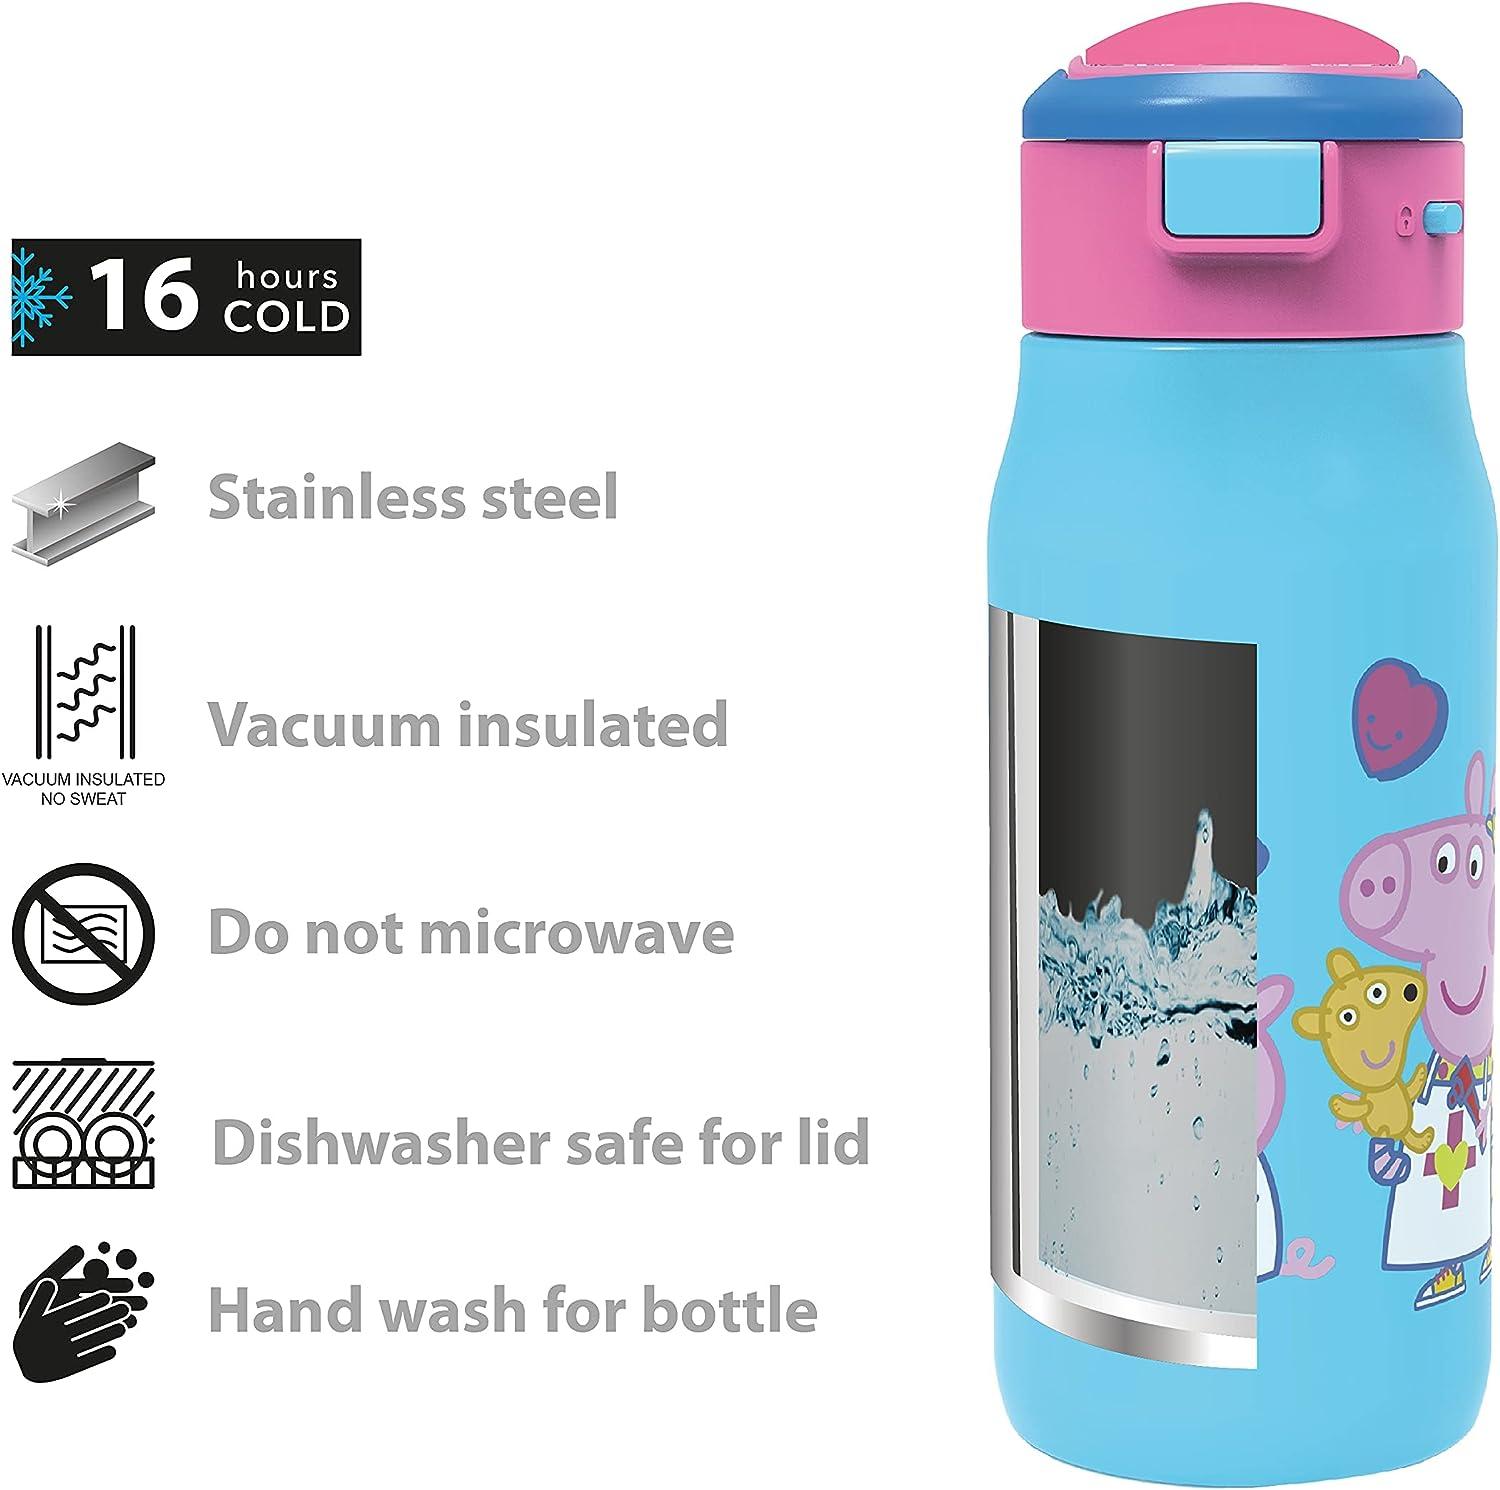 Zak Designs Minnie Mouse 15.5oz Stainless Steel Bottle with with Push Button Spout